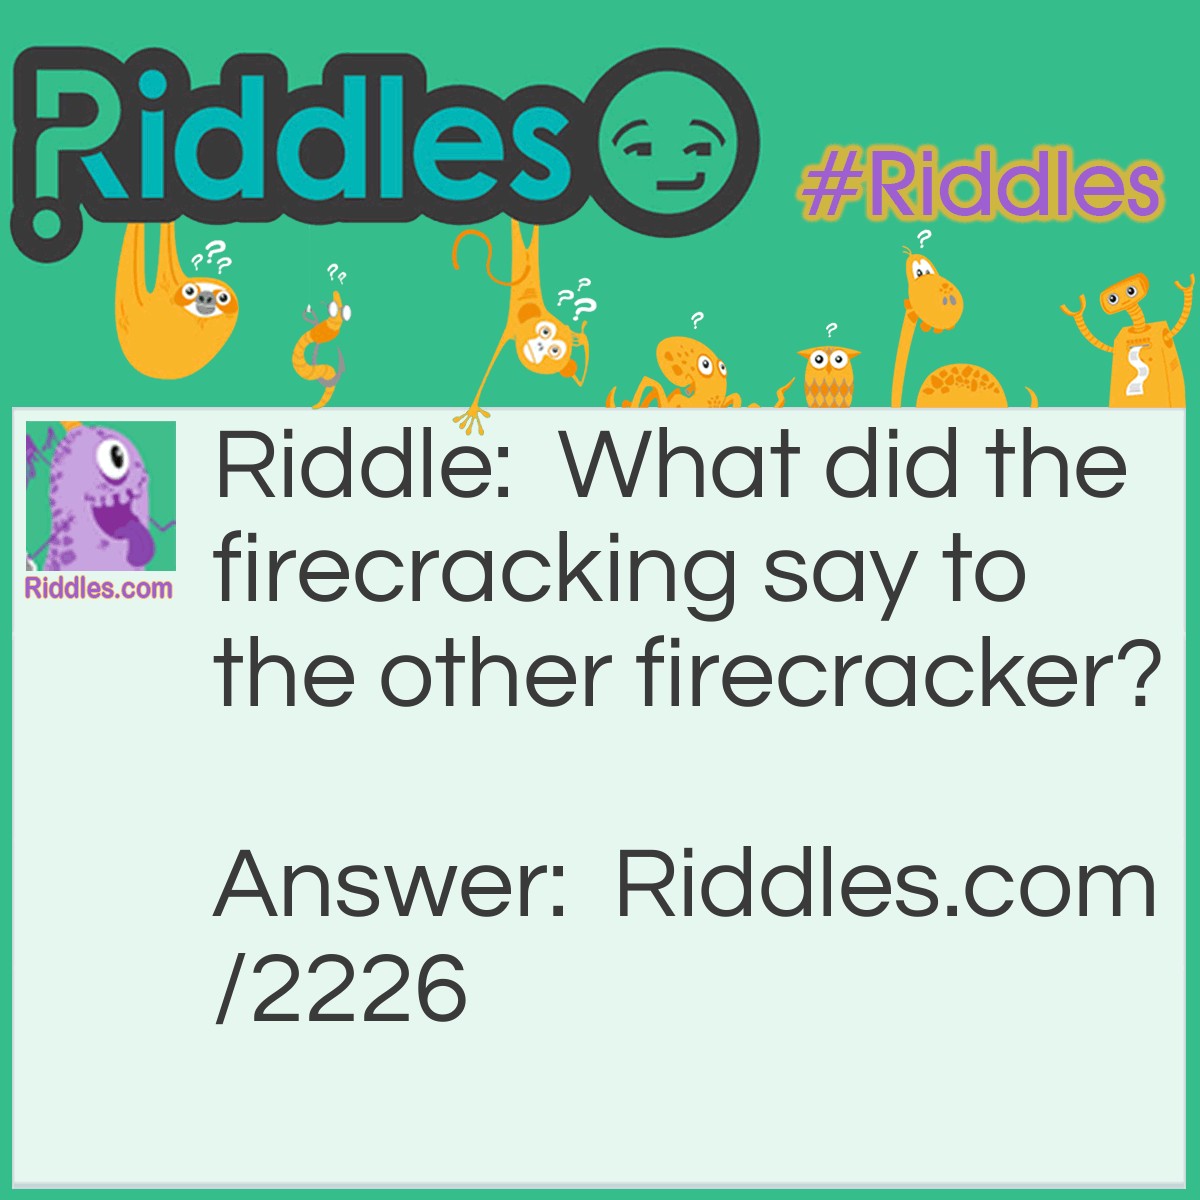 Riddle: What did the big firecracker say to the little firecracker? Answer: My pop is bigger than your pop.